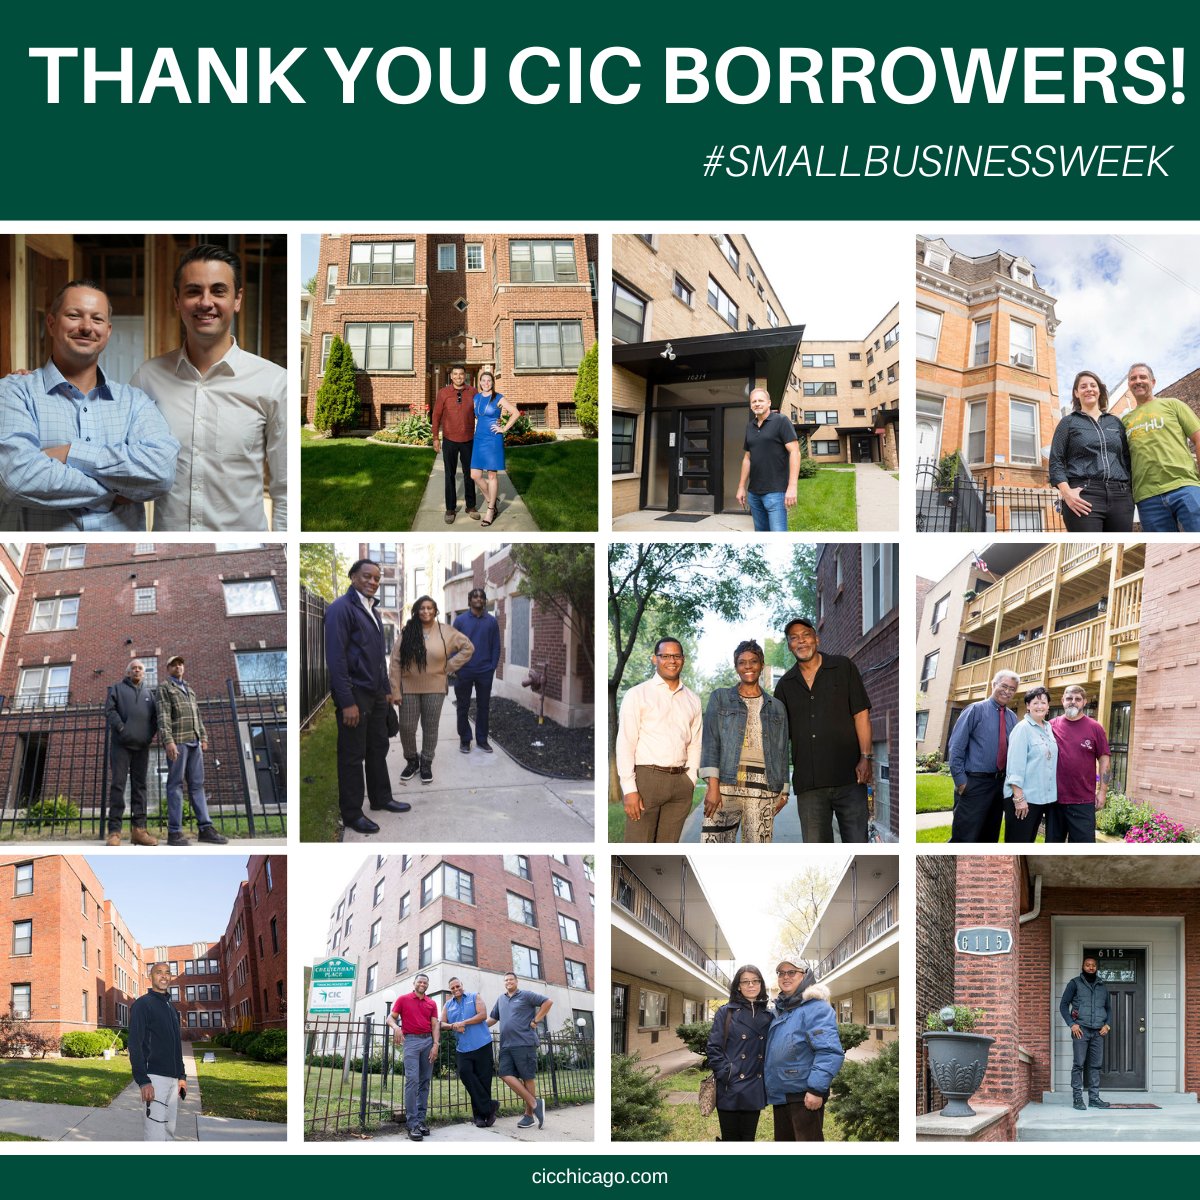 Happy Small Business Week! CIC is proud to work with dedicated small business owners who own and operate affordable rental housing throughout the Chicago region. This week, we celebrate the hard work of these entrepreneurs. Thank you!